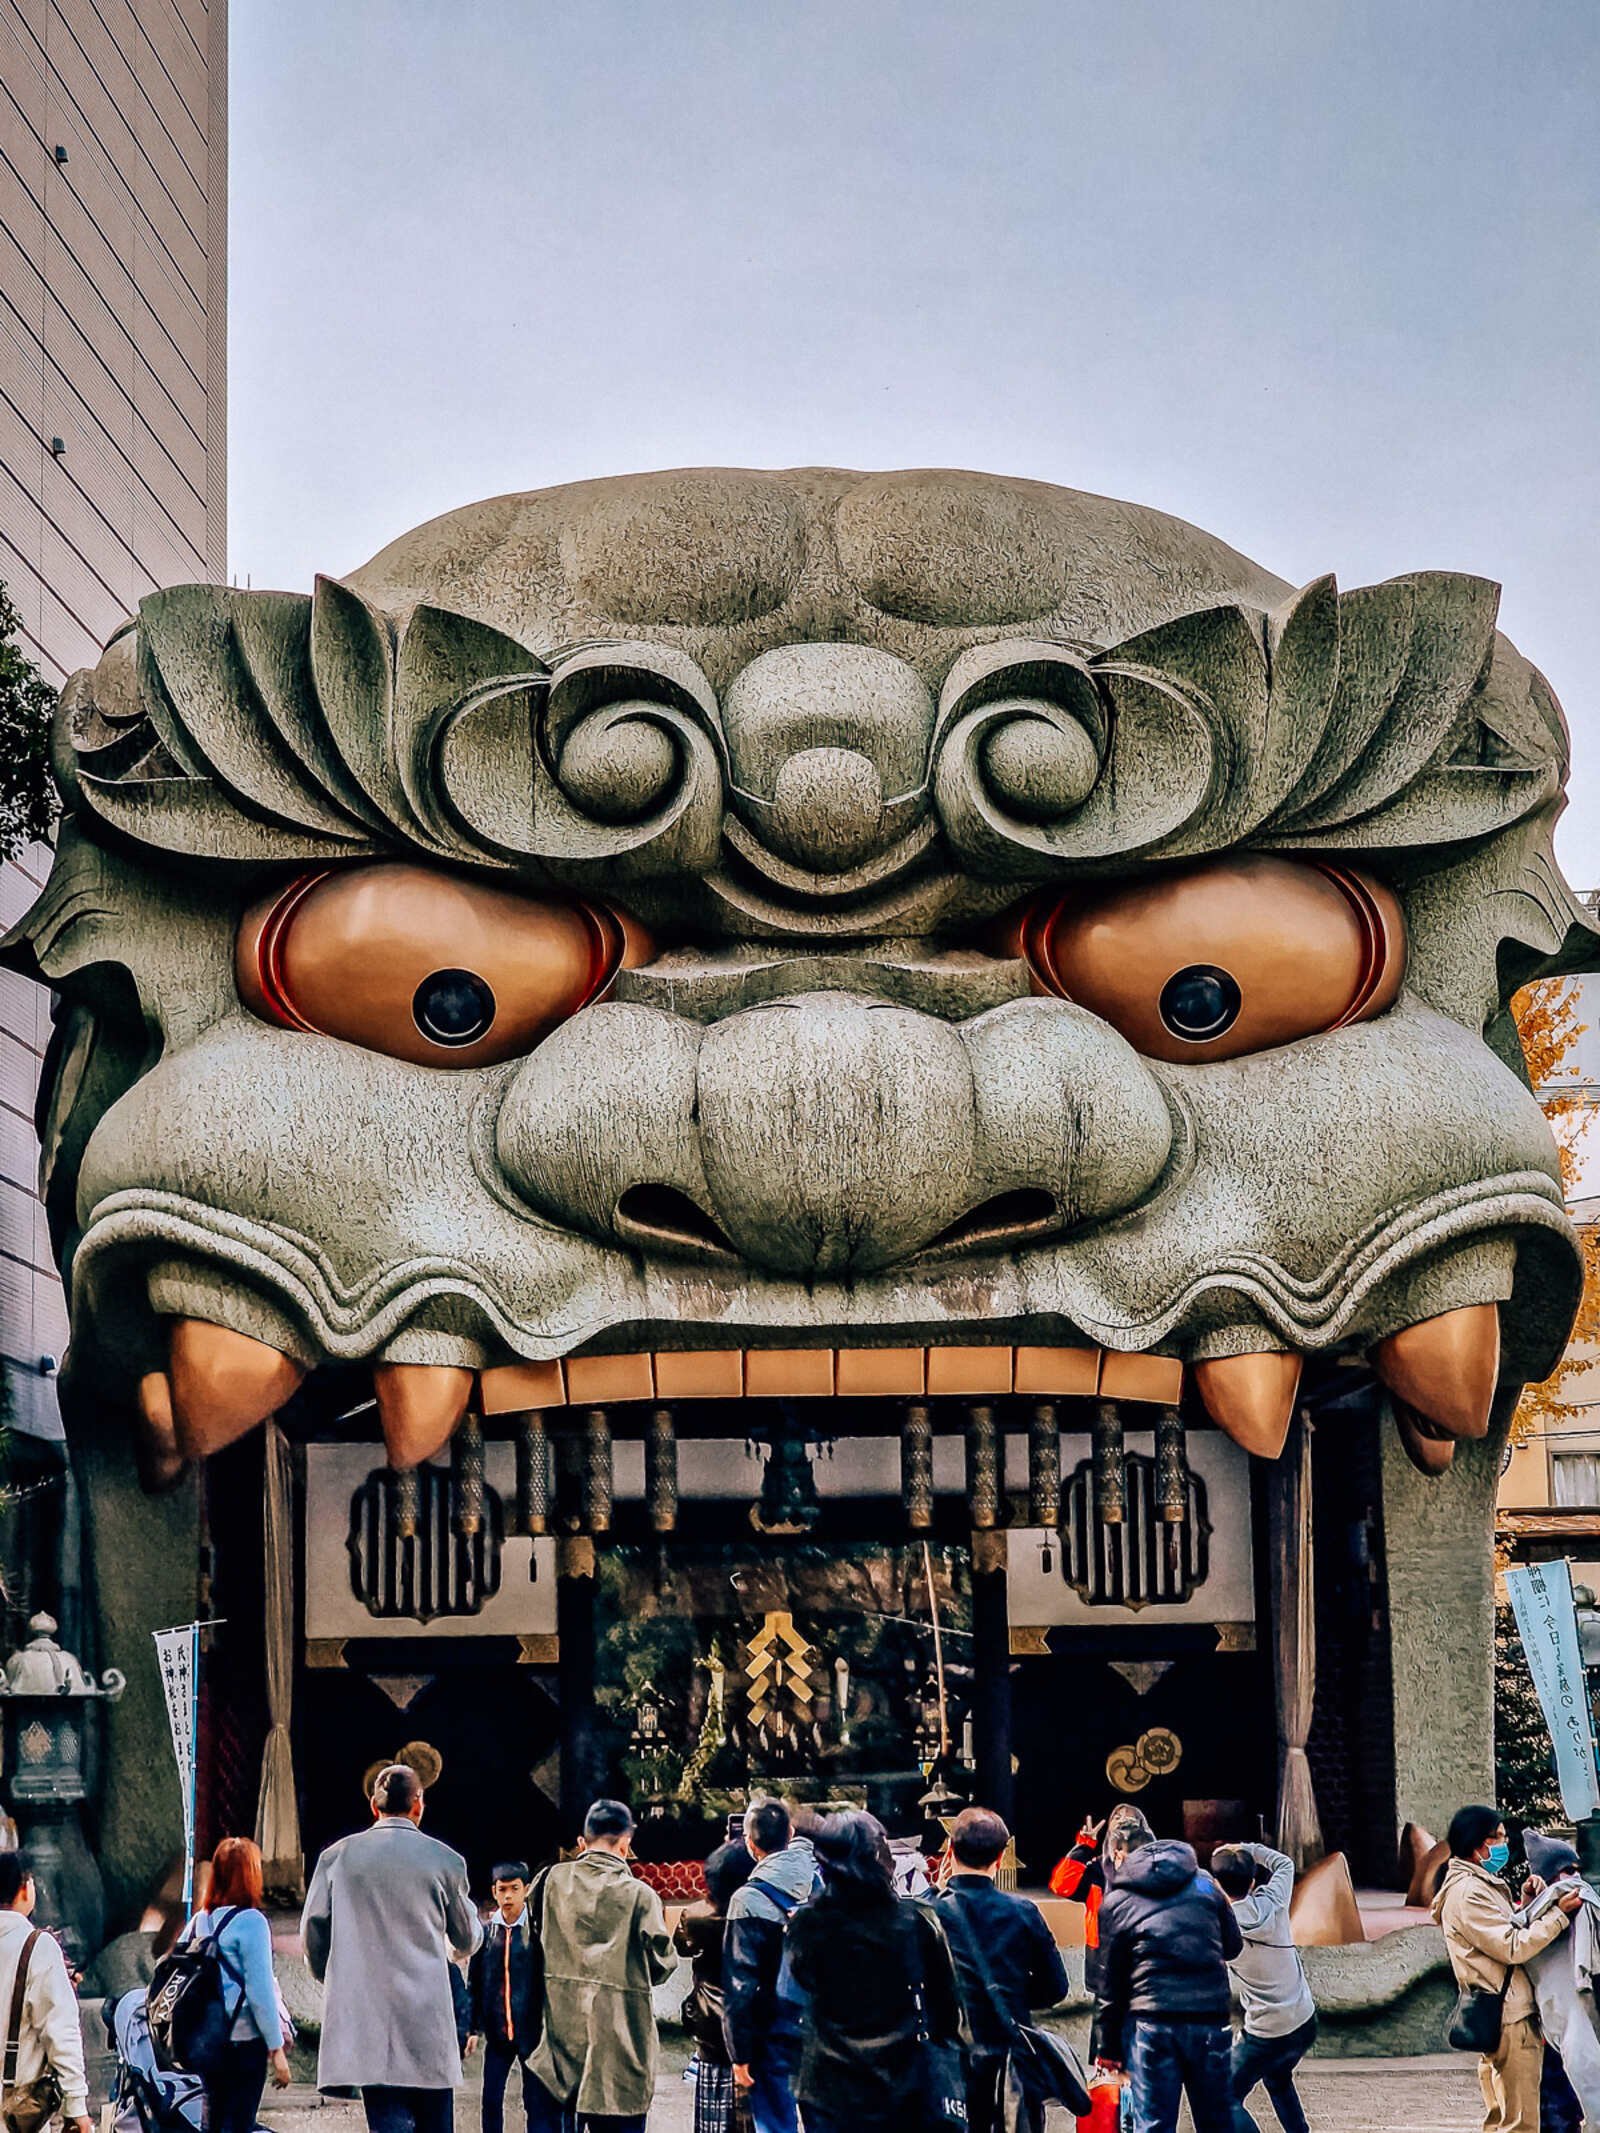 a huge stone dragon head at a shrine in osaka. It's teeth and eyes are gold and its mouth is open where a performance stage is inside